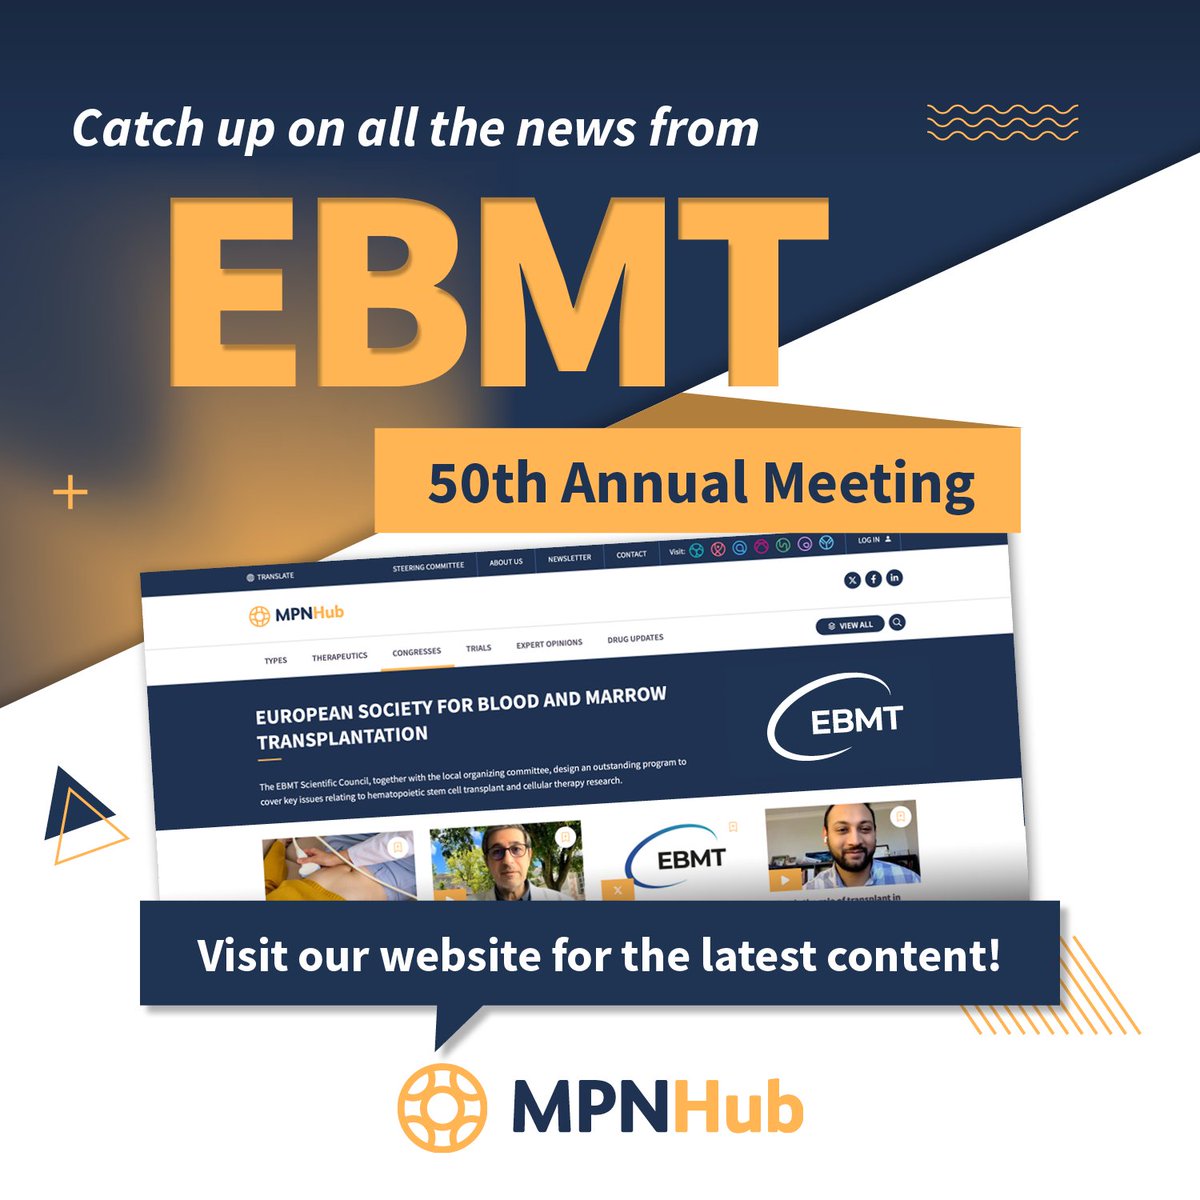 We hope you enjoyed following our live updates and congress coverage from #EBMT24! Keep an eye on our socials for post-congress key points and insights. #IME #CancerResearch #EBMT